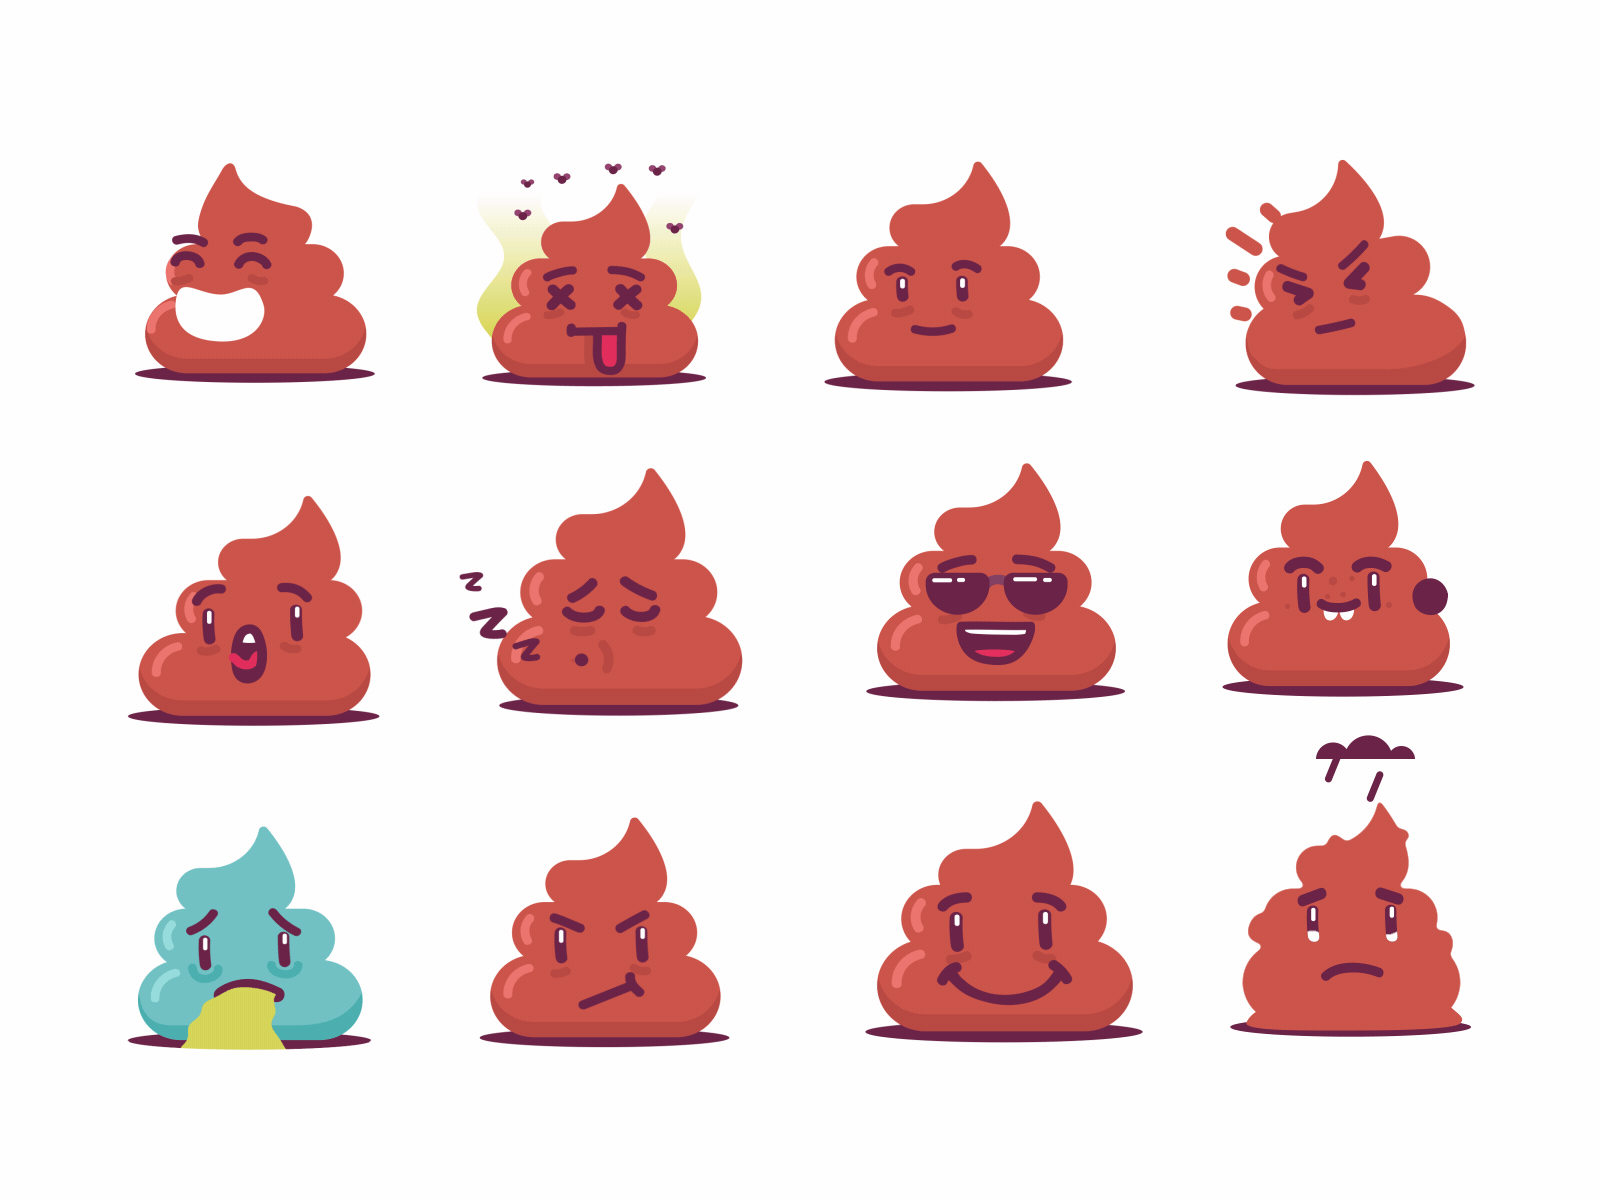 Poo animation 2d angry animation character cry dead emotion fun happy ok poo sad shit smile sticker throw